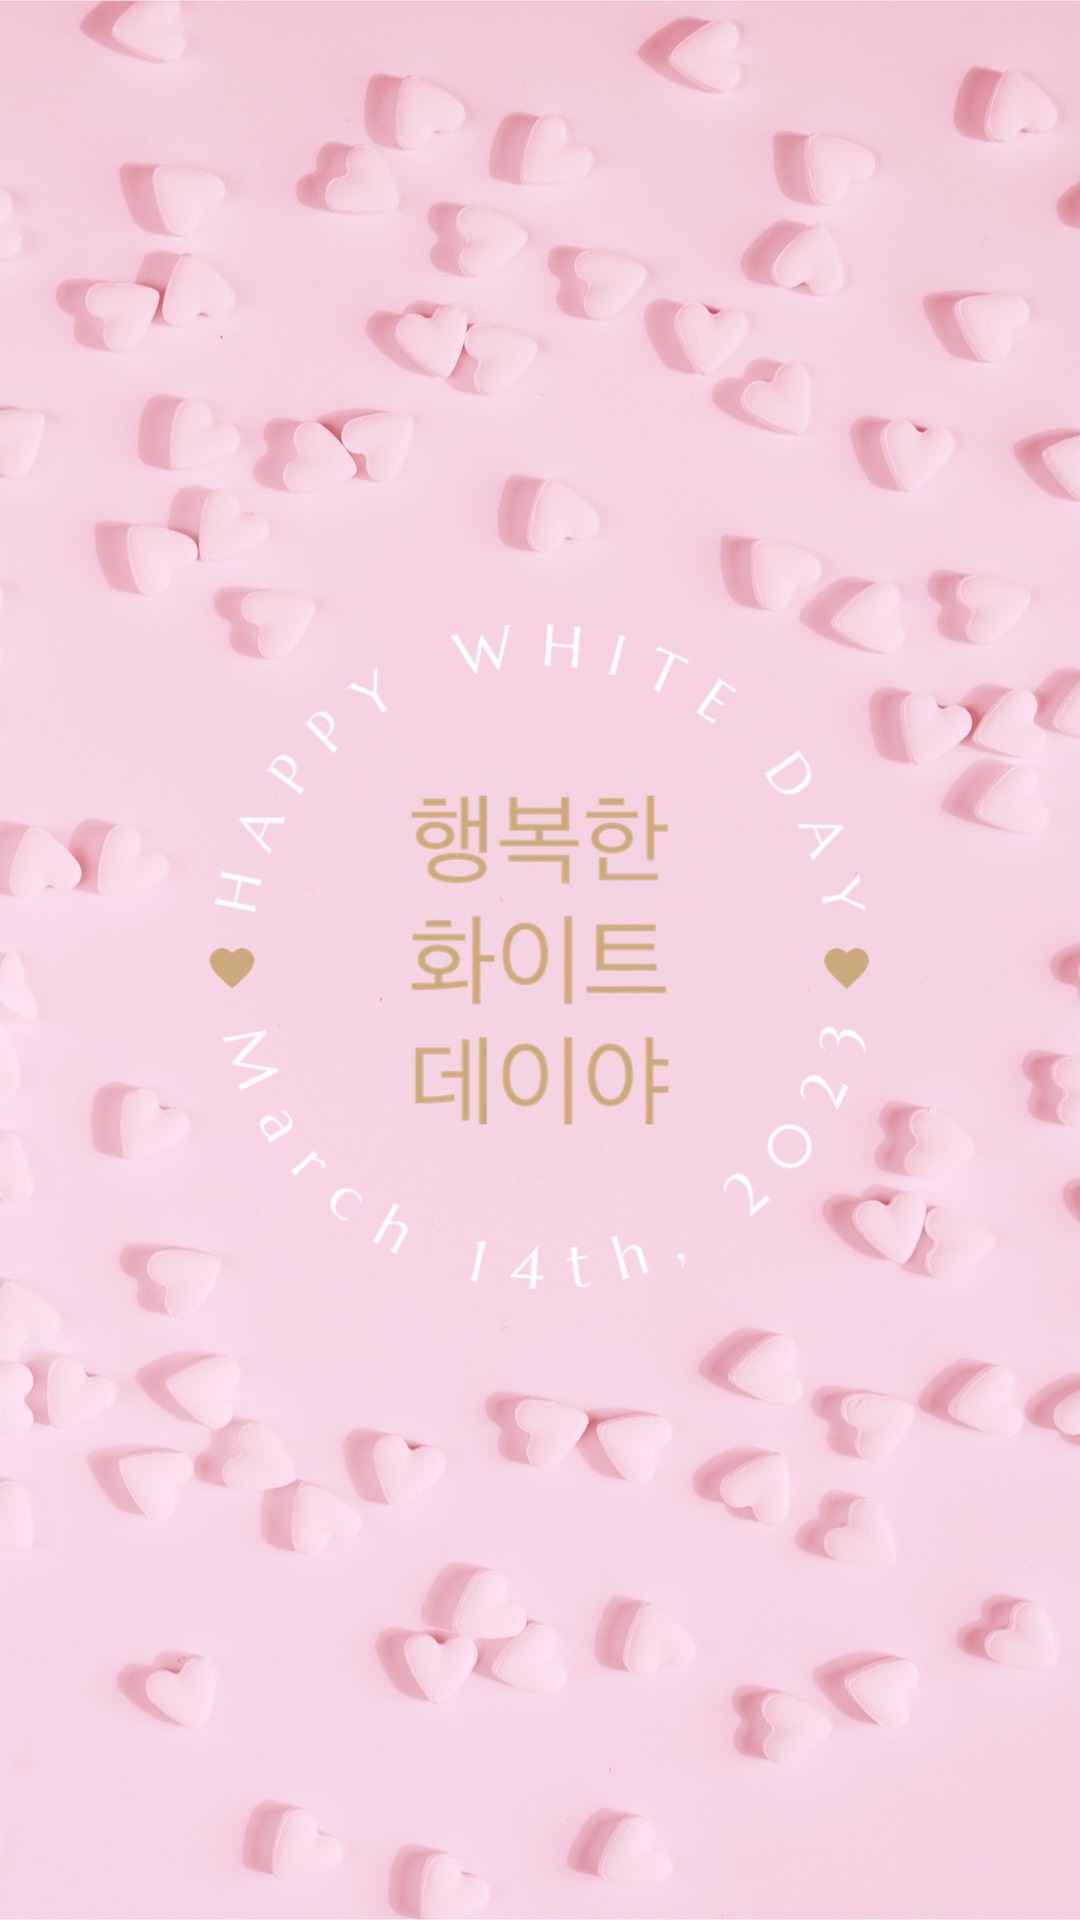 Korea white day romantic pink hearts instagram story template